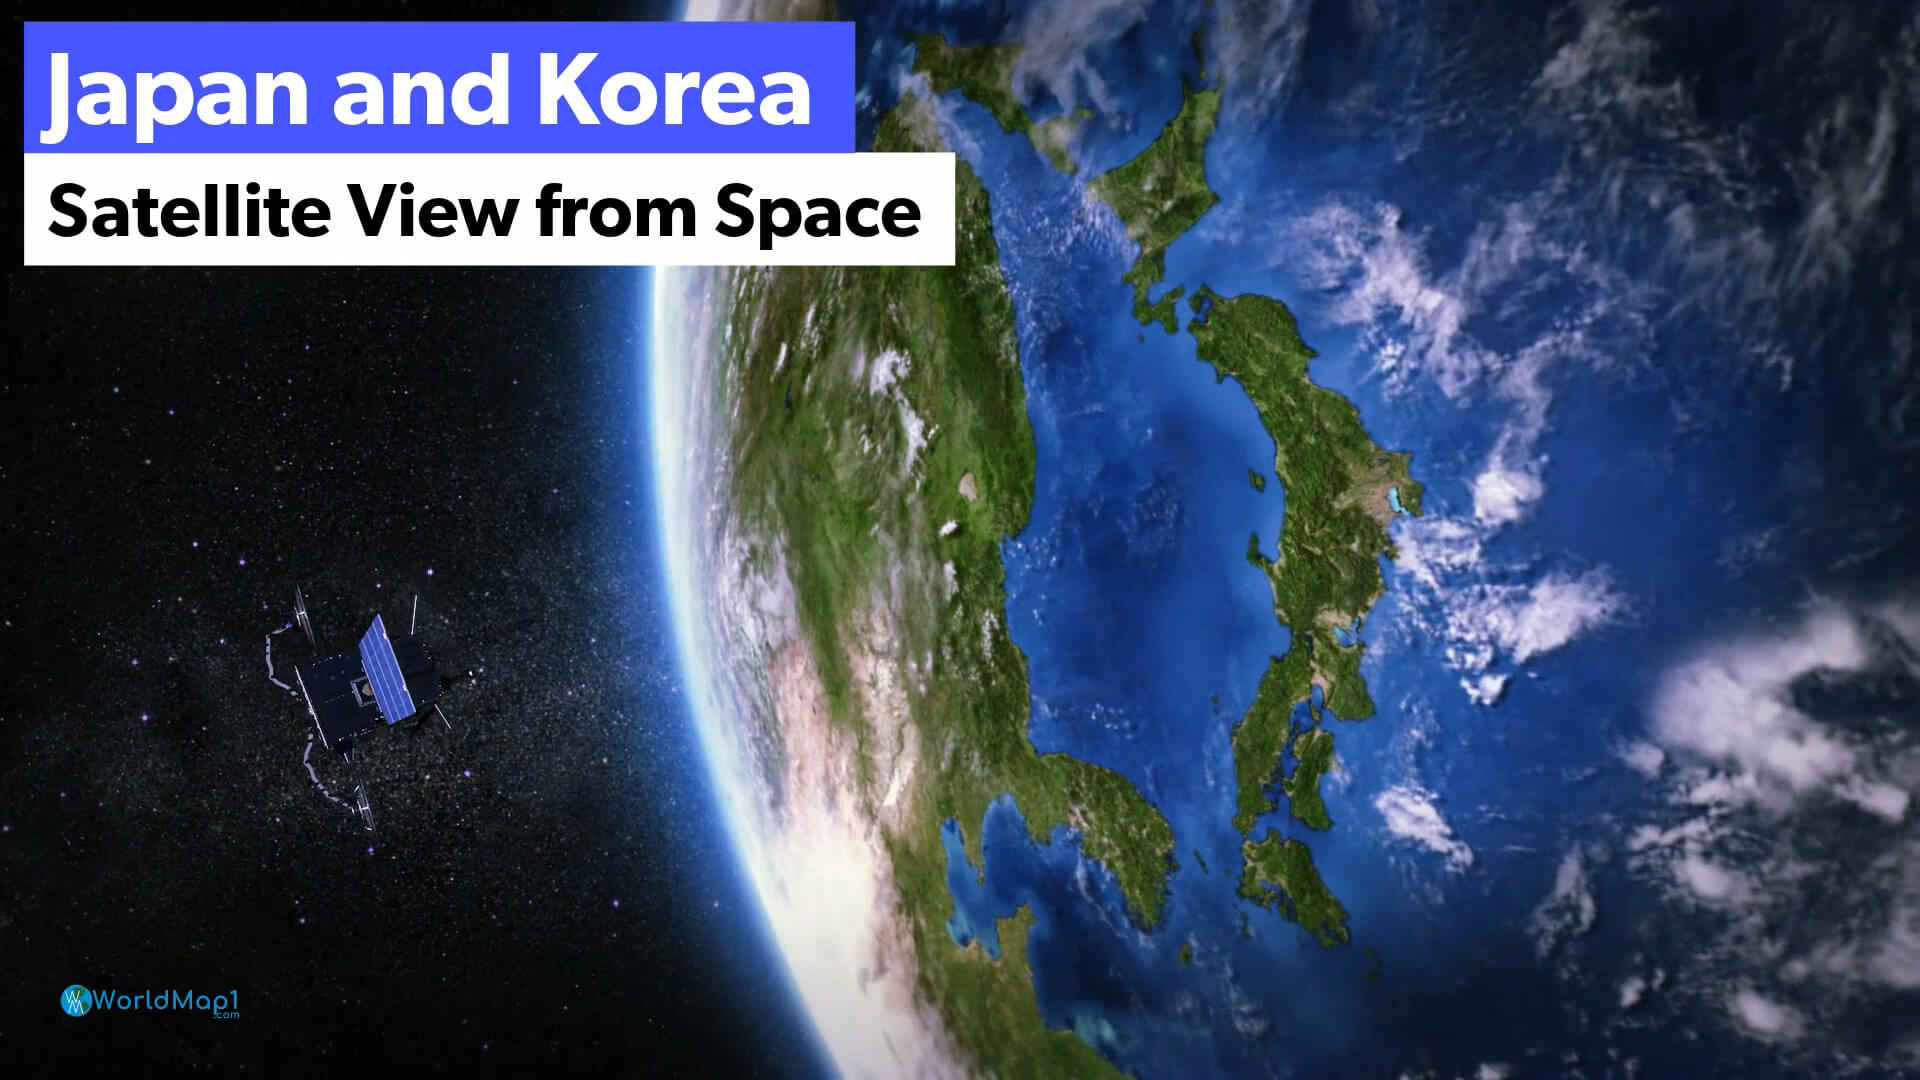 Japan and Korea Satellite View from Space